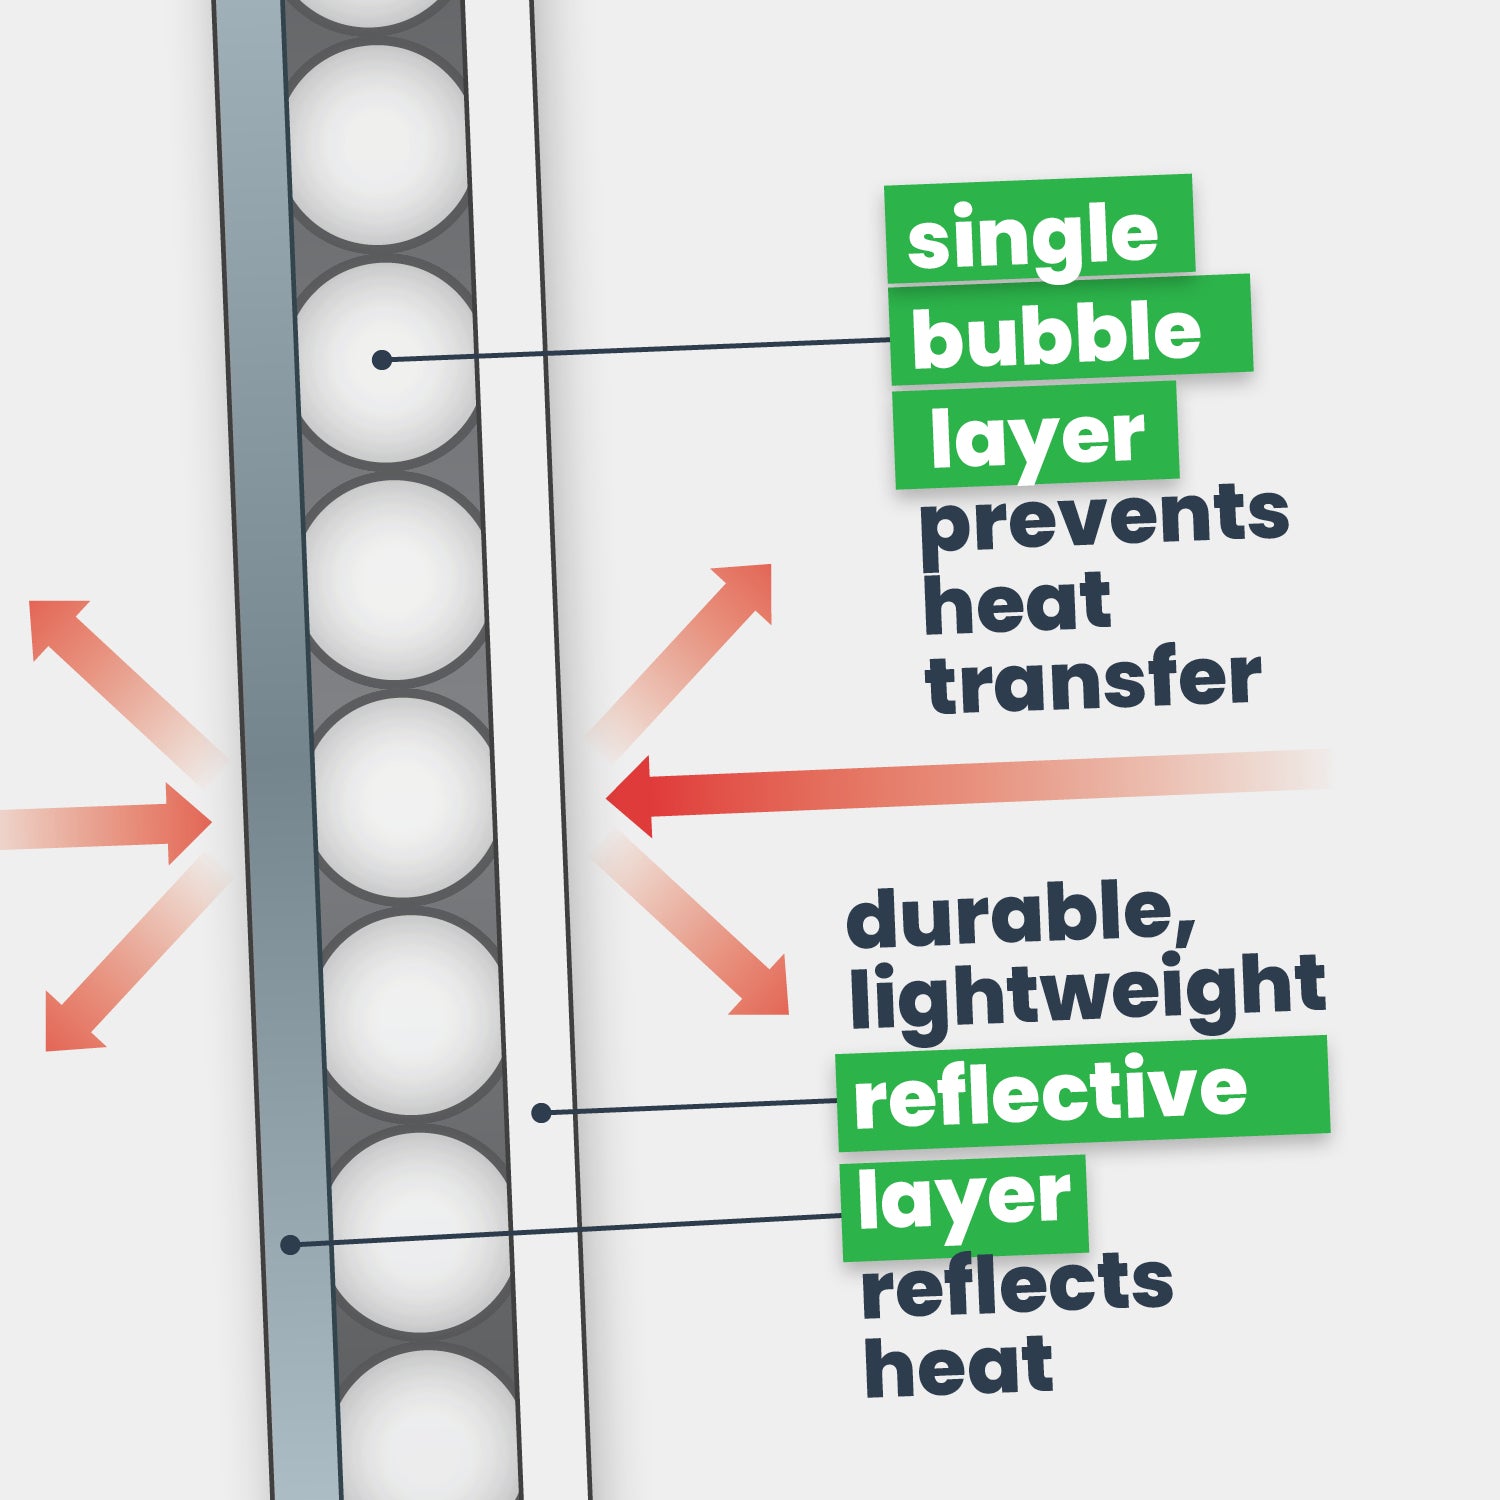 single bubble layer prevents heat transfer. durable, lightweight reflective layer reflects heat